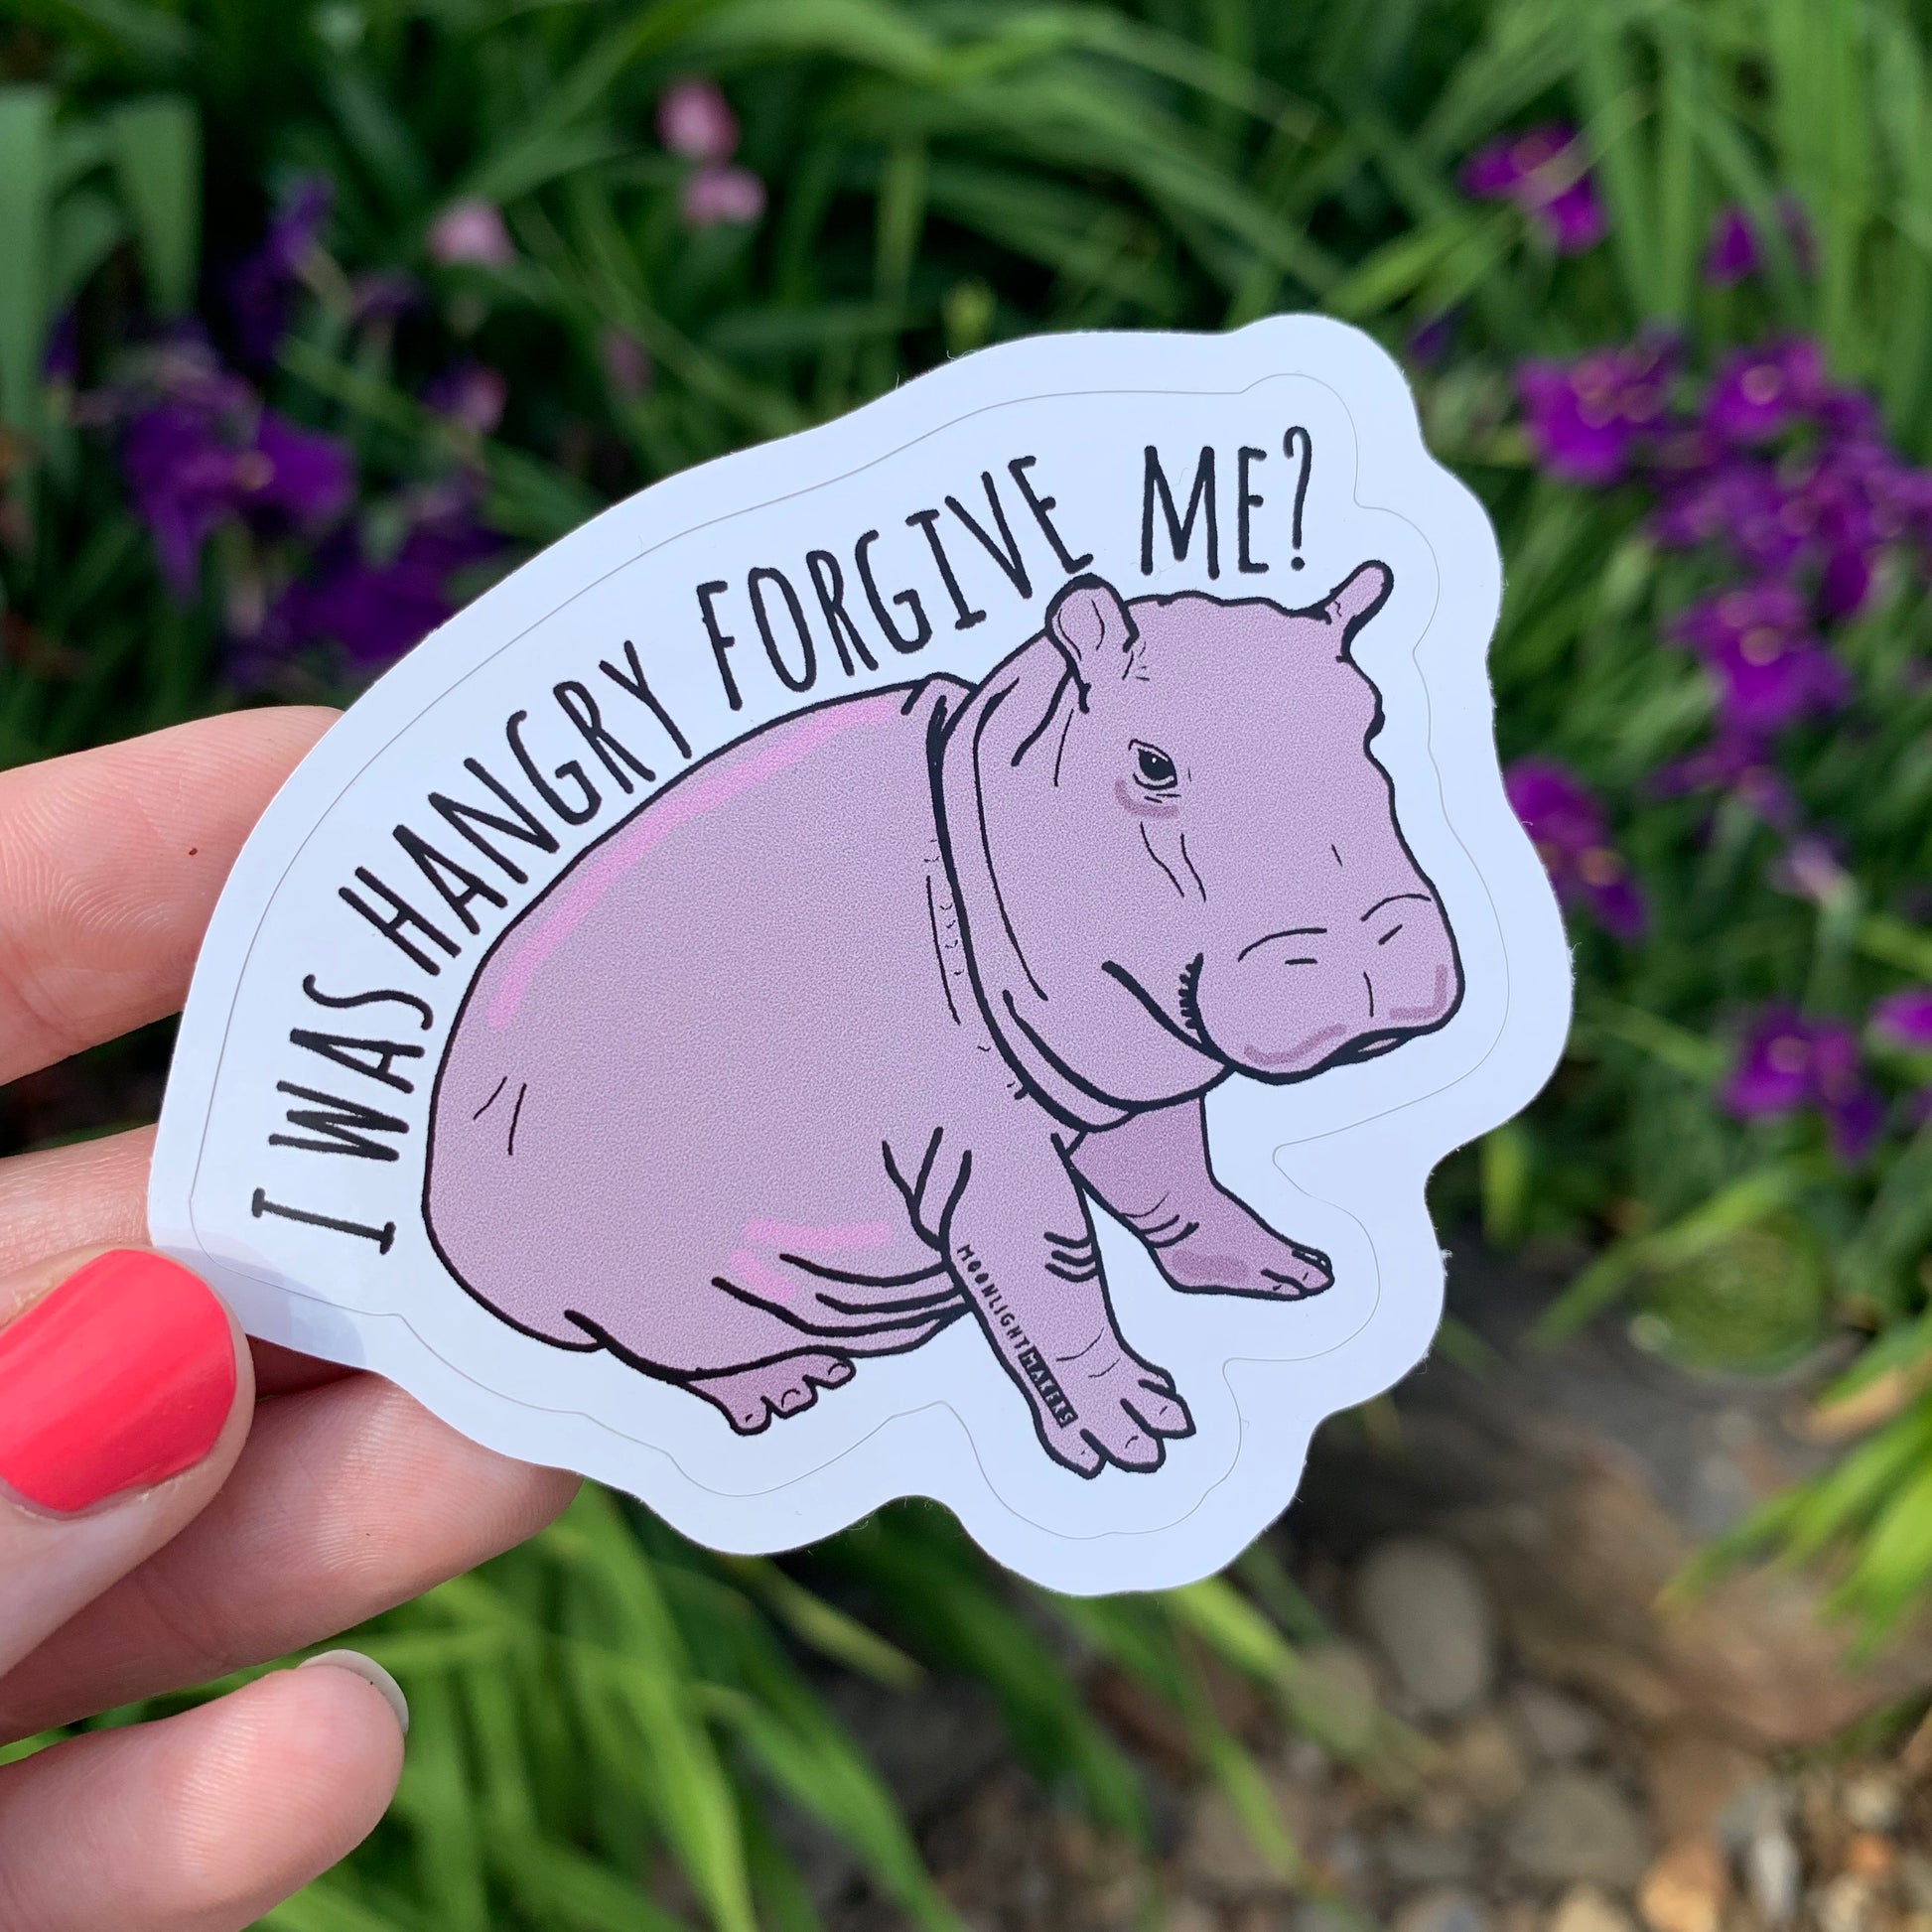 I Was Hangry Forgive Me? - Die Cut Sticker - MoonlightMakers